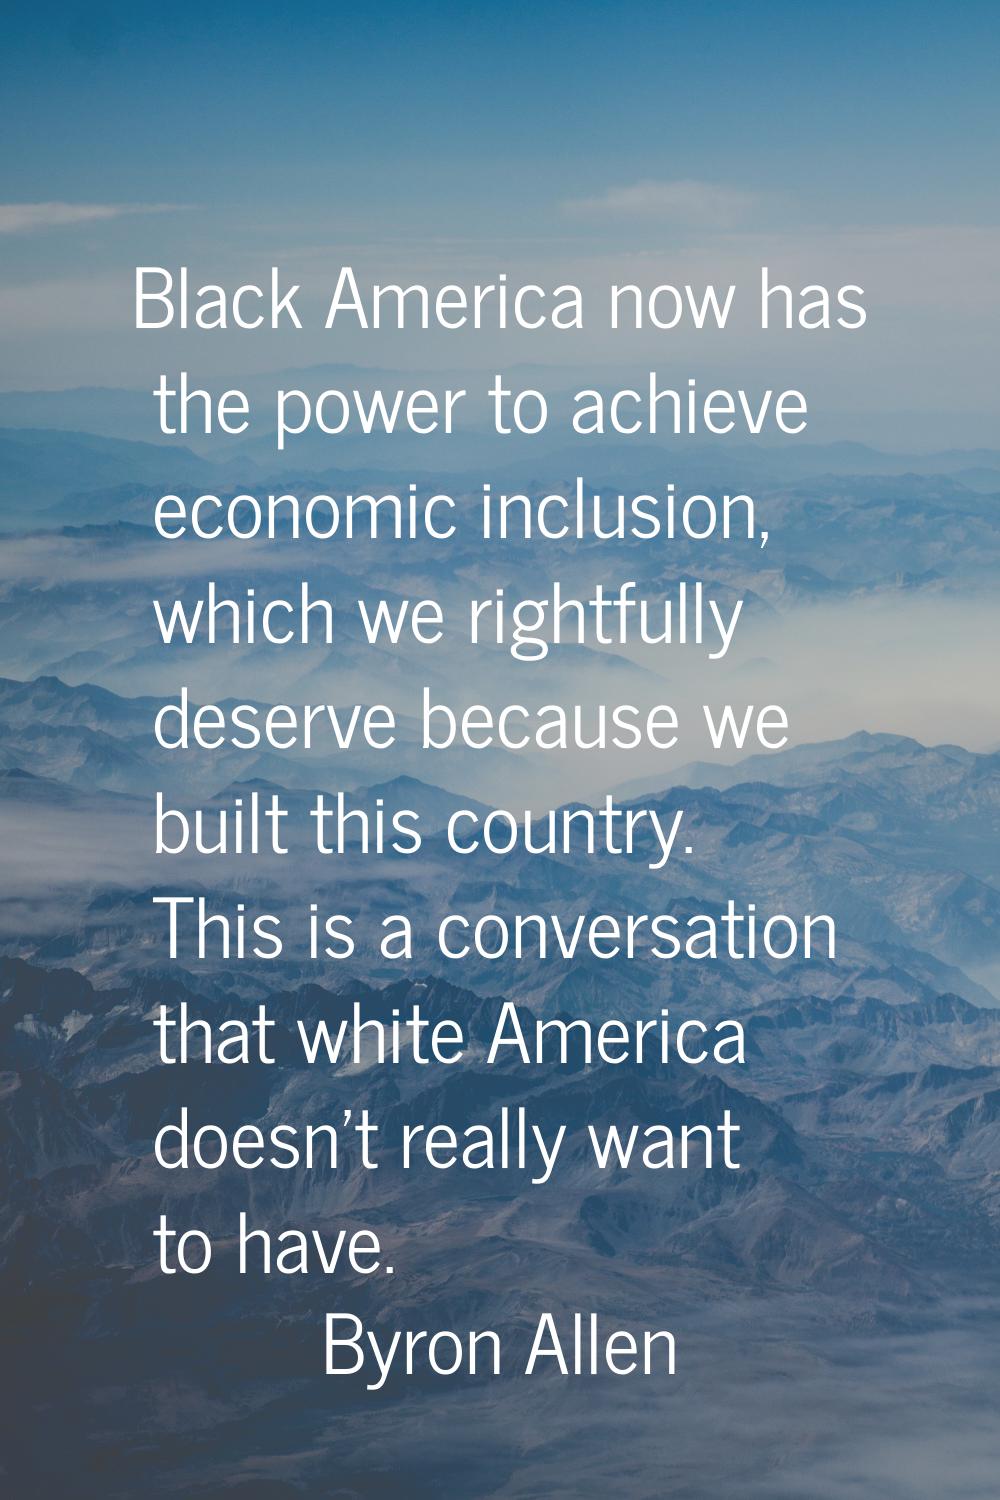 Black America now has the power to achieve economic inclusion, which we rightfully deserve because 